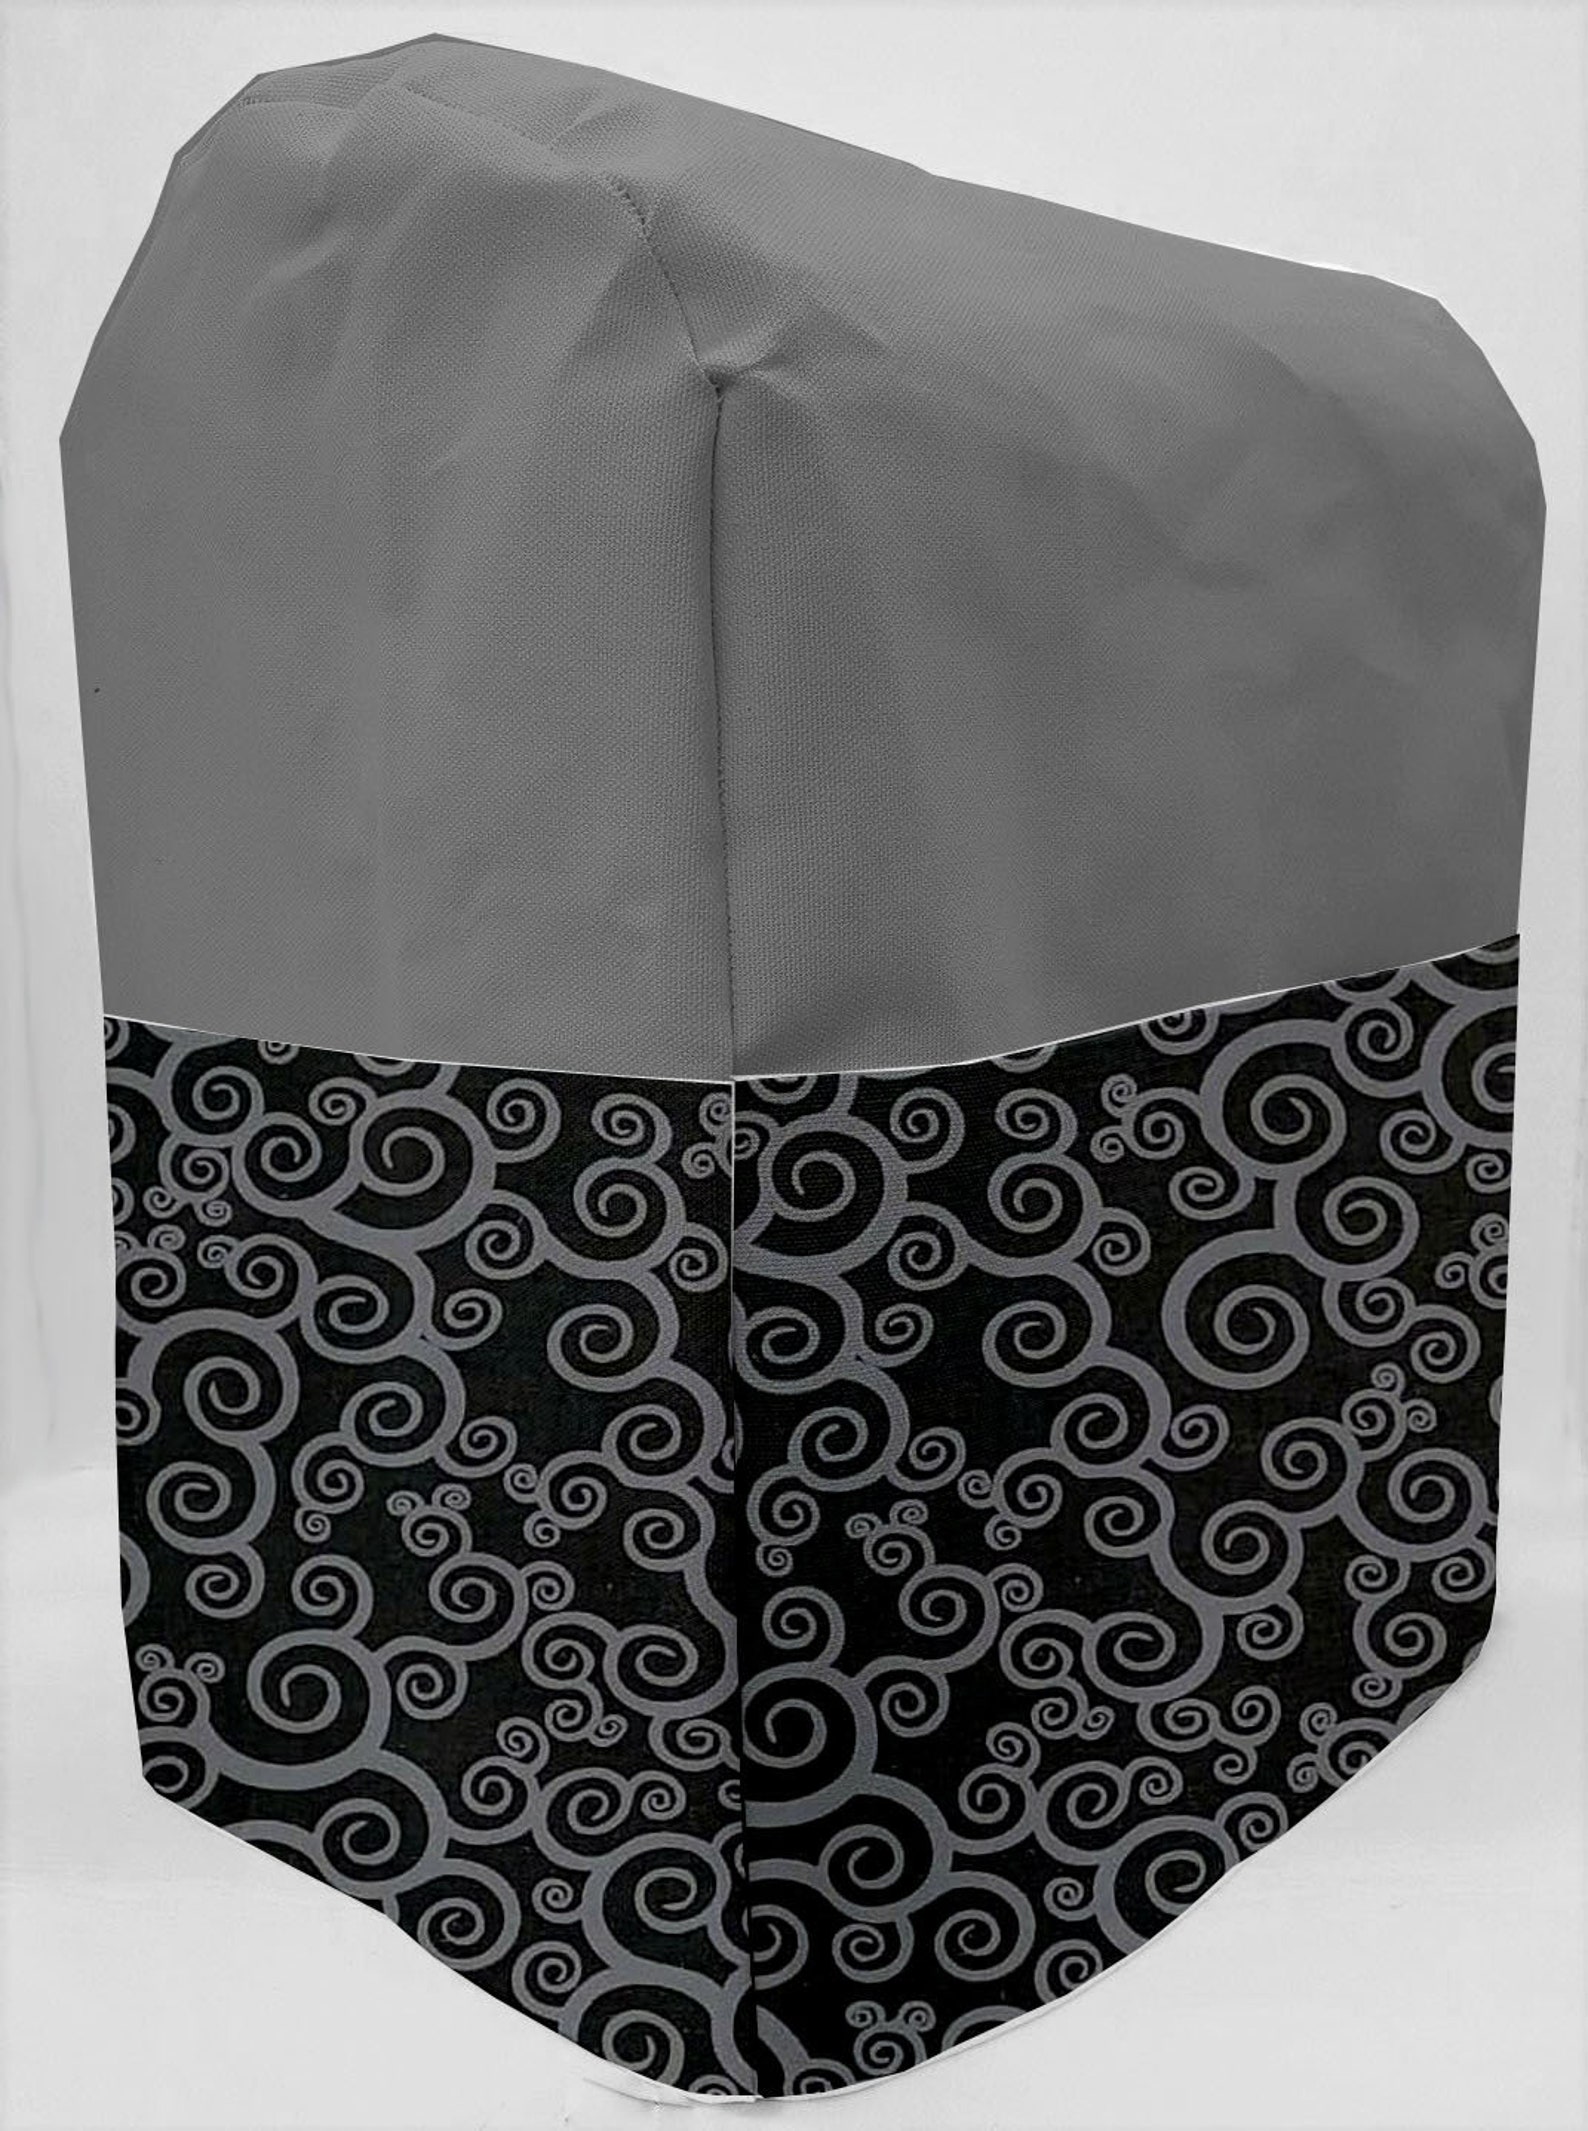 Canvas Black & Gray Scroll Damask Cover Compatible with Kitchenaid Stand Mixer by Penny's Needful Things (Gray, 3.5 qt Artisan Mini Tilt Head) - image 1 of 2